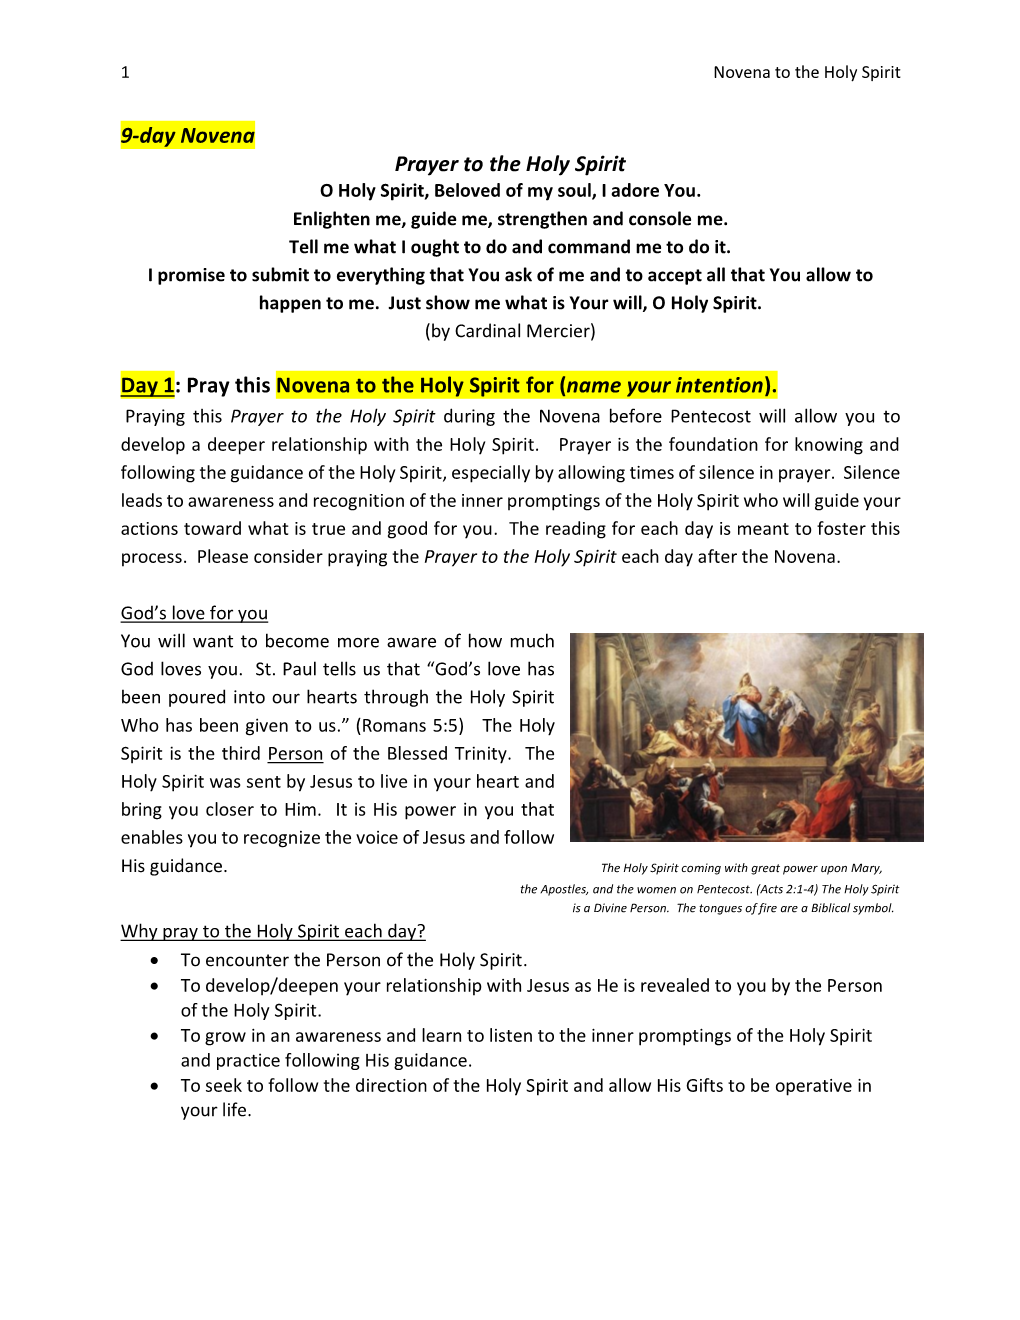 Pray This Novena to the Holy Spirit for (Name Your Intention)